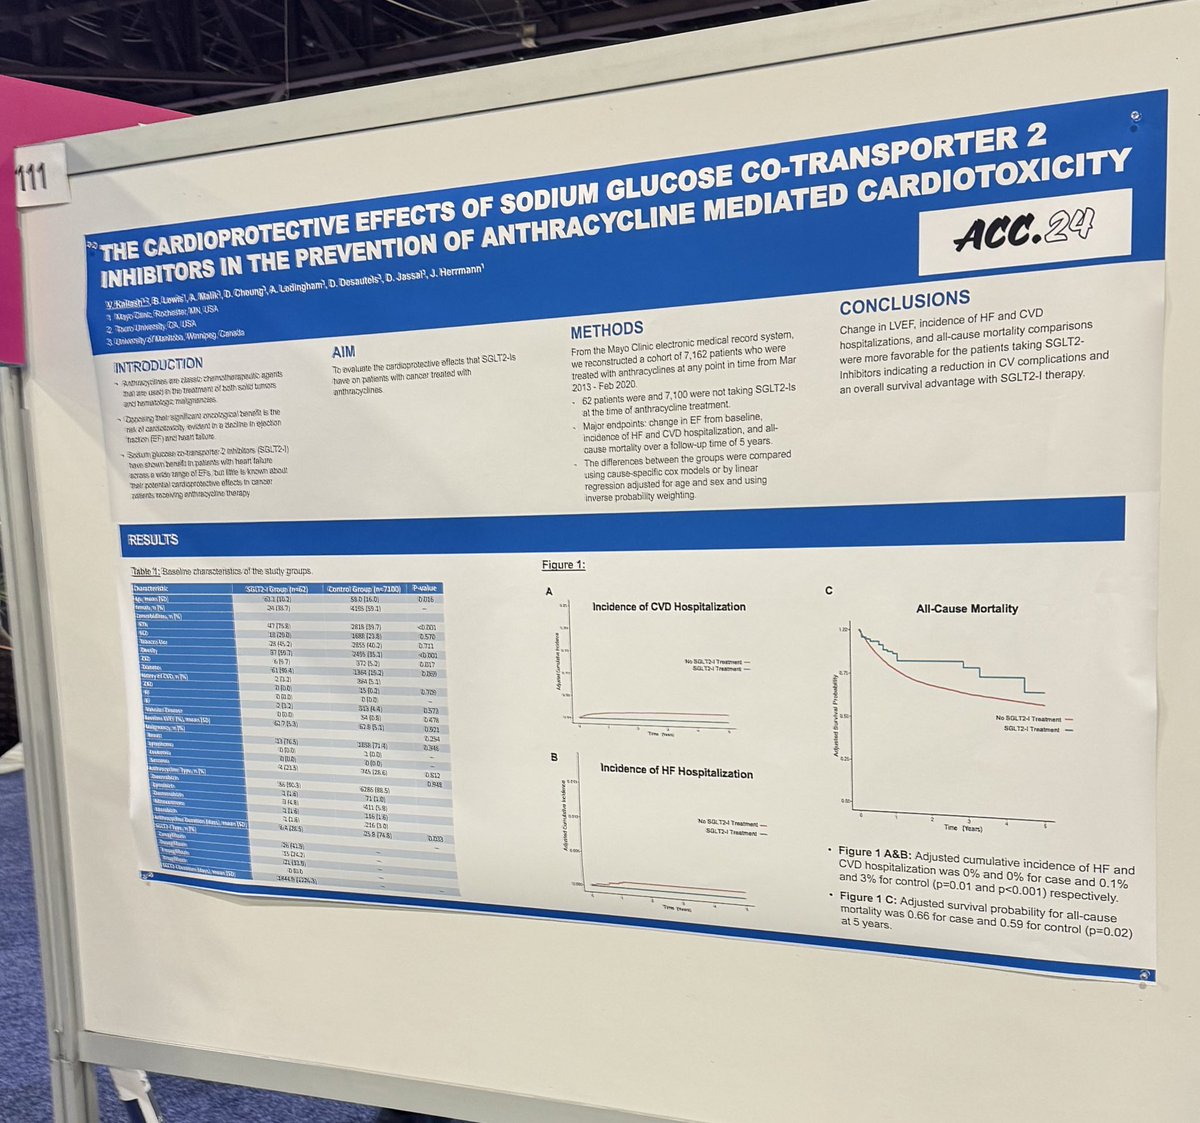 Another great #cardioonc poster suggesting benefit of sglt2 inhibitors in preventing anthracycline cardiotoxicity. #cardioonc #jacccardioonc #ACC24